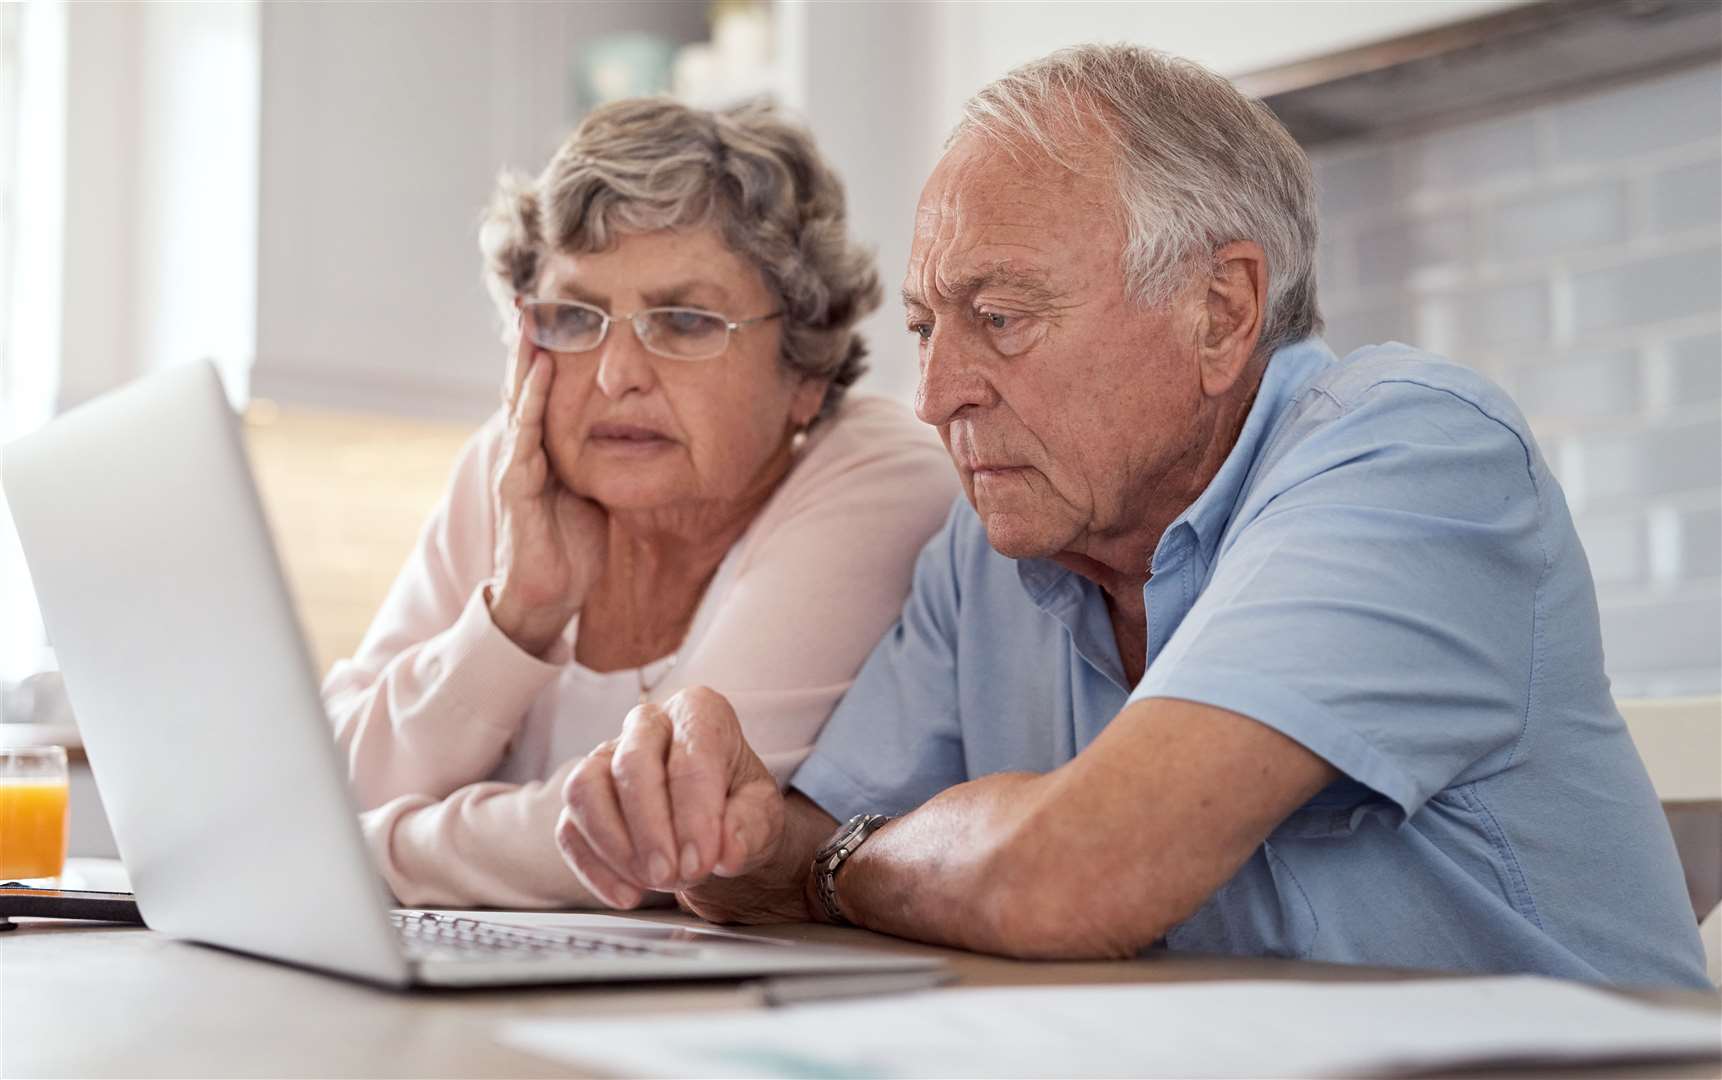 You can register your lasting Power of Attorney online or in paper form.credit.istock